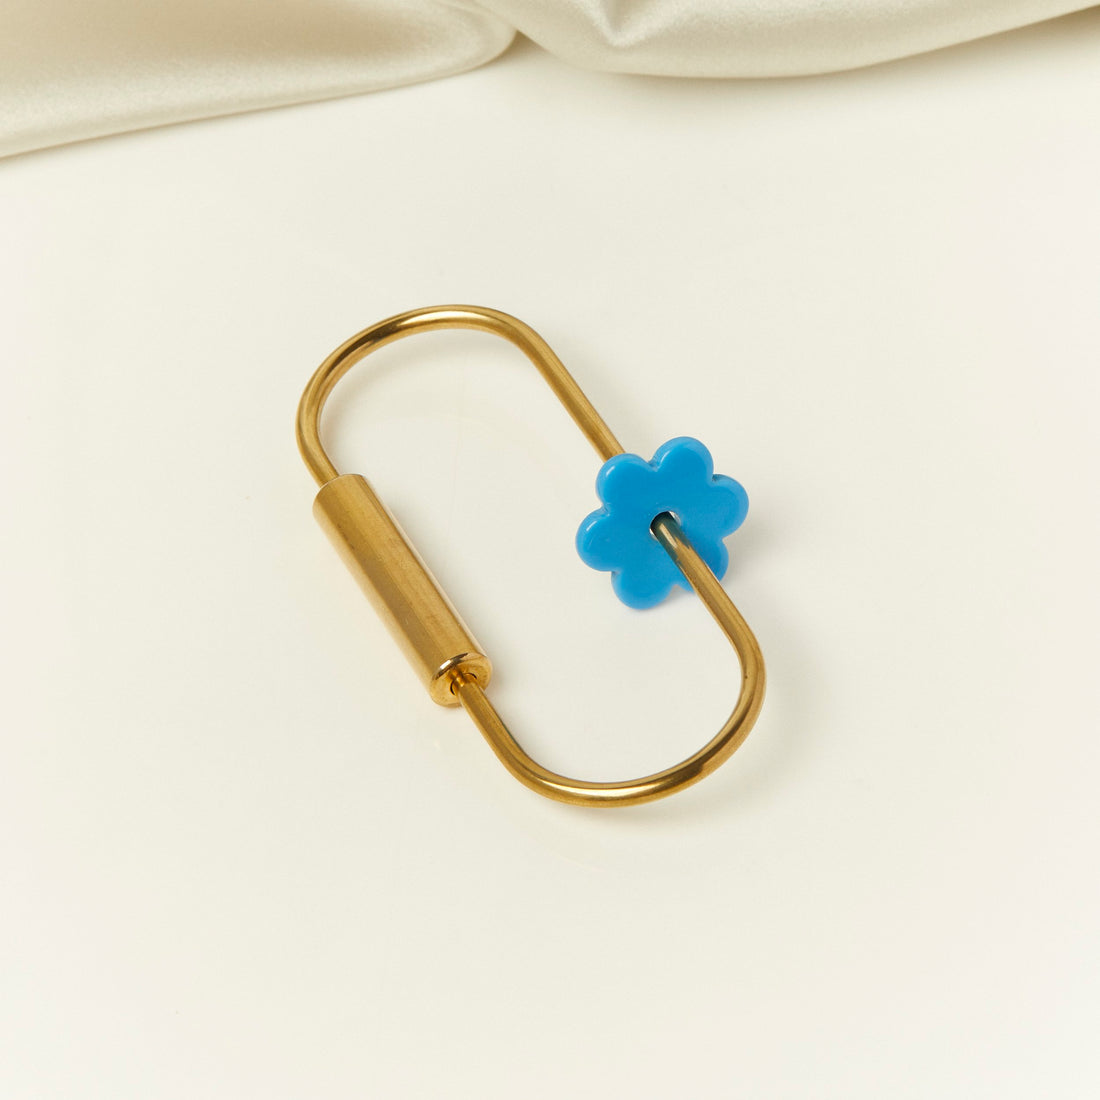 Brass Key Ring with Blue Daisy – NOOWORKS